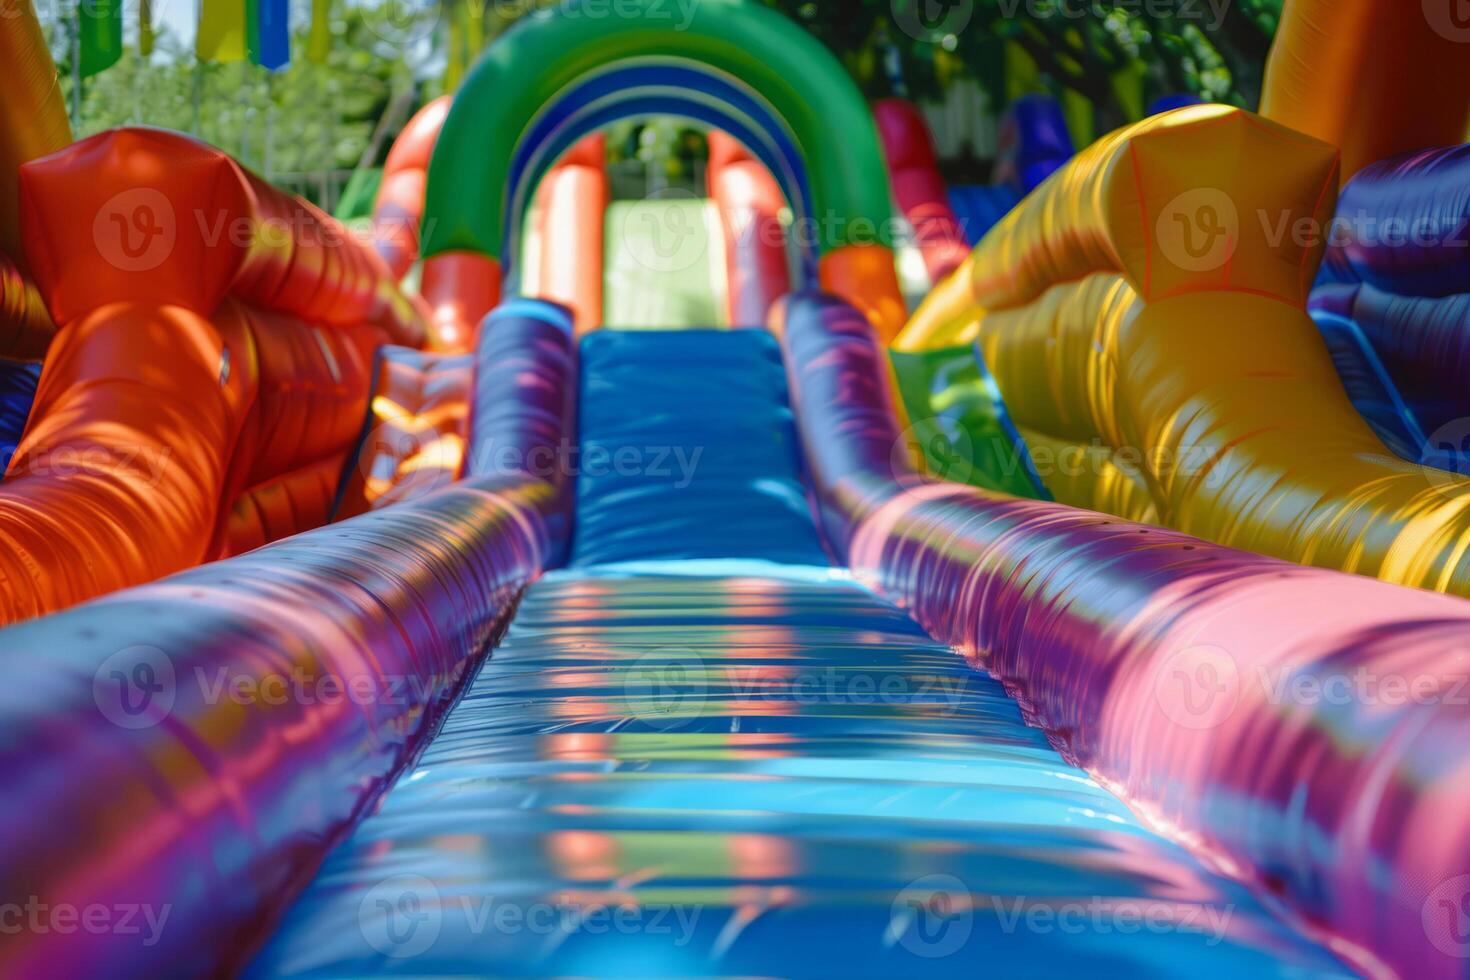 AI generated Colorful bounce slide for children entertainment in backyard photo